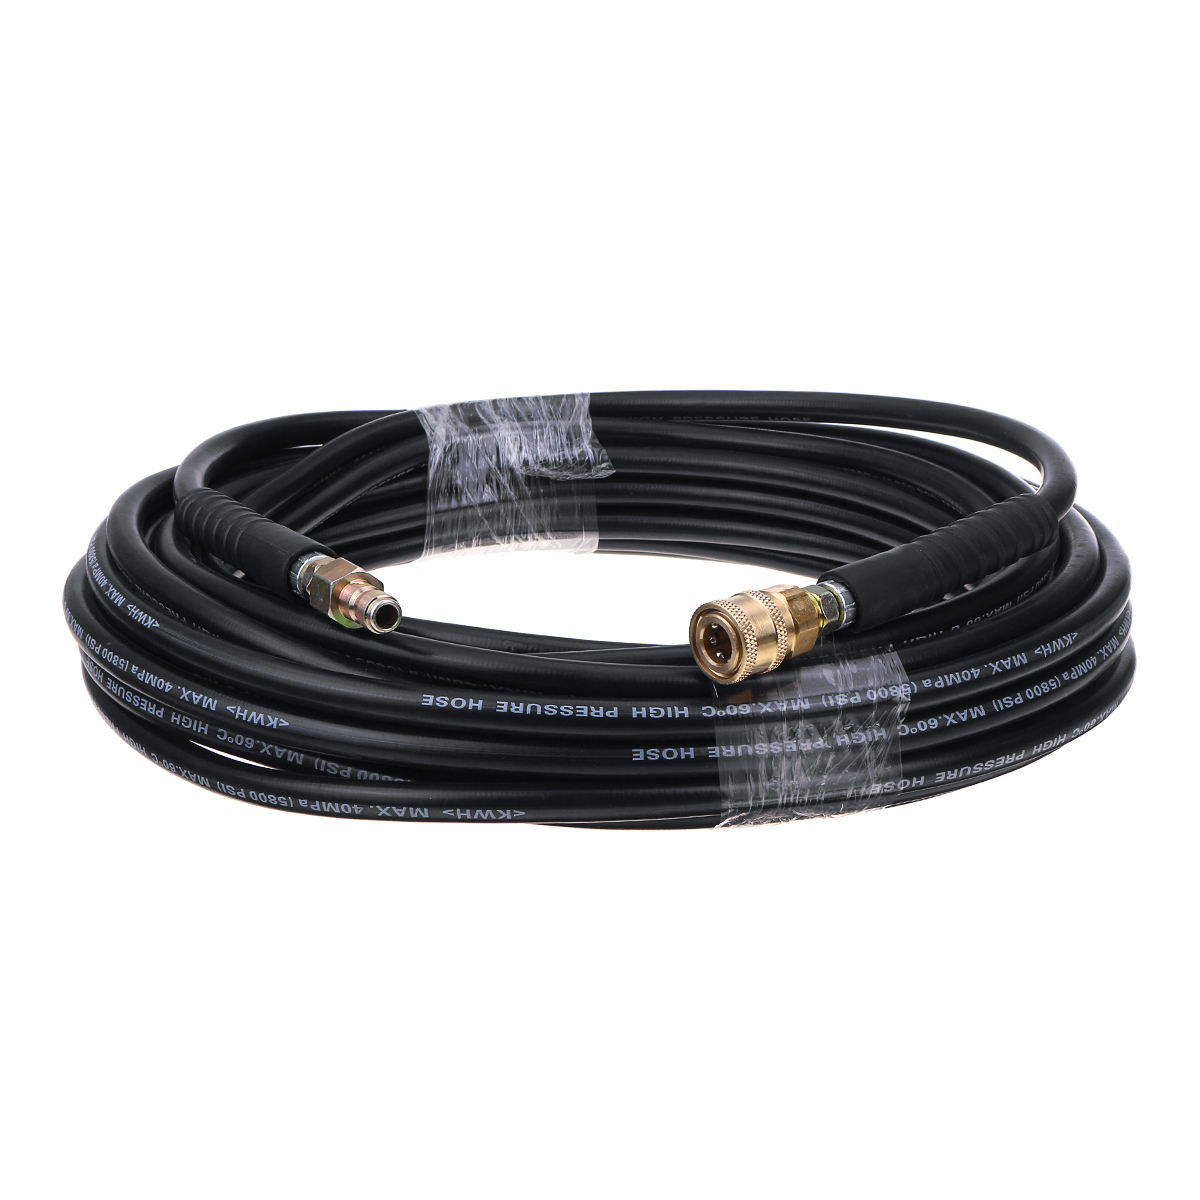 10M-High-Pressure-Washer-Hose-14-Inch-Quick-Release-Couplings-Tube-1582199-4